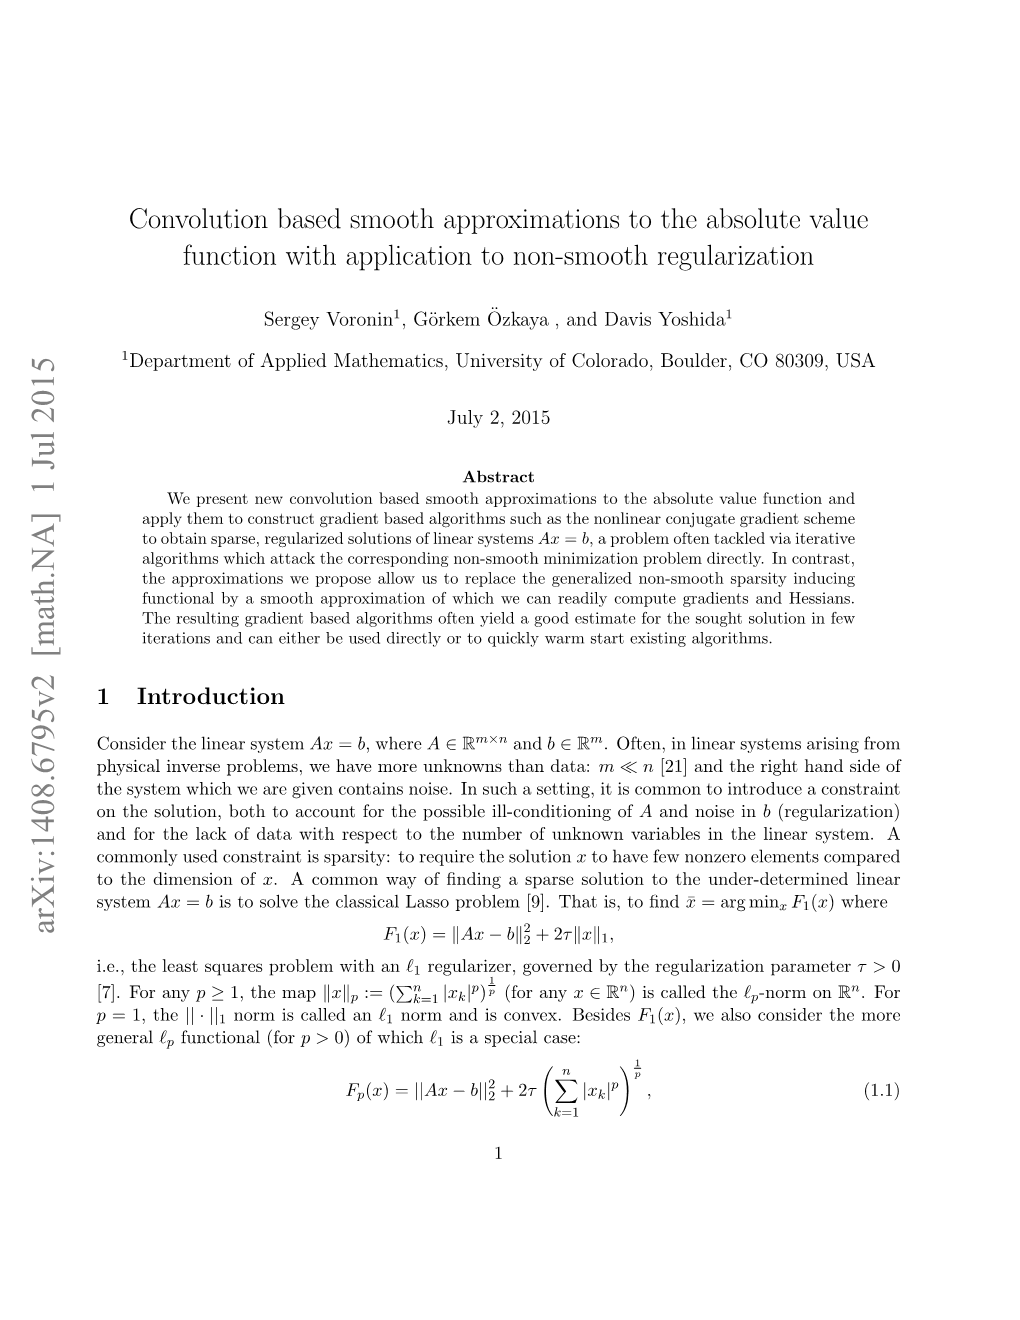 Convolution Based Smooth Approximations to the Absolute Value Function with Application to Non-Smooth Regularization